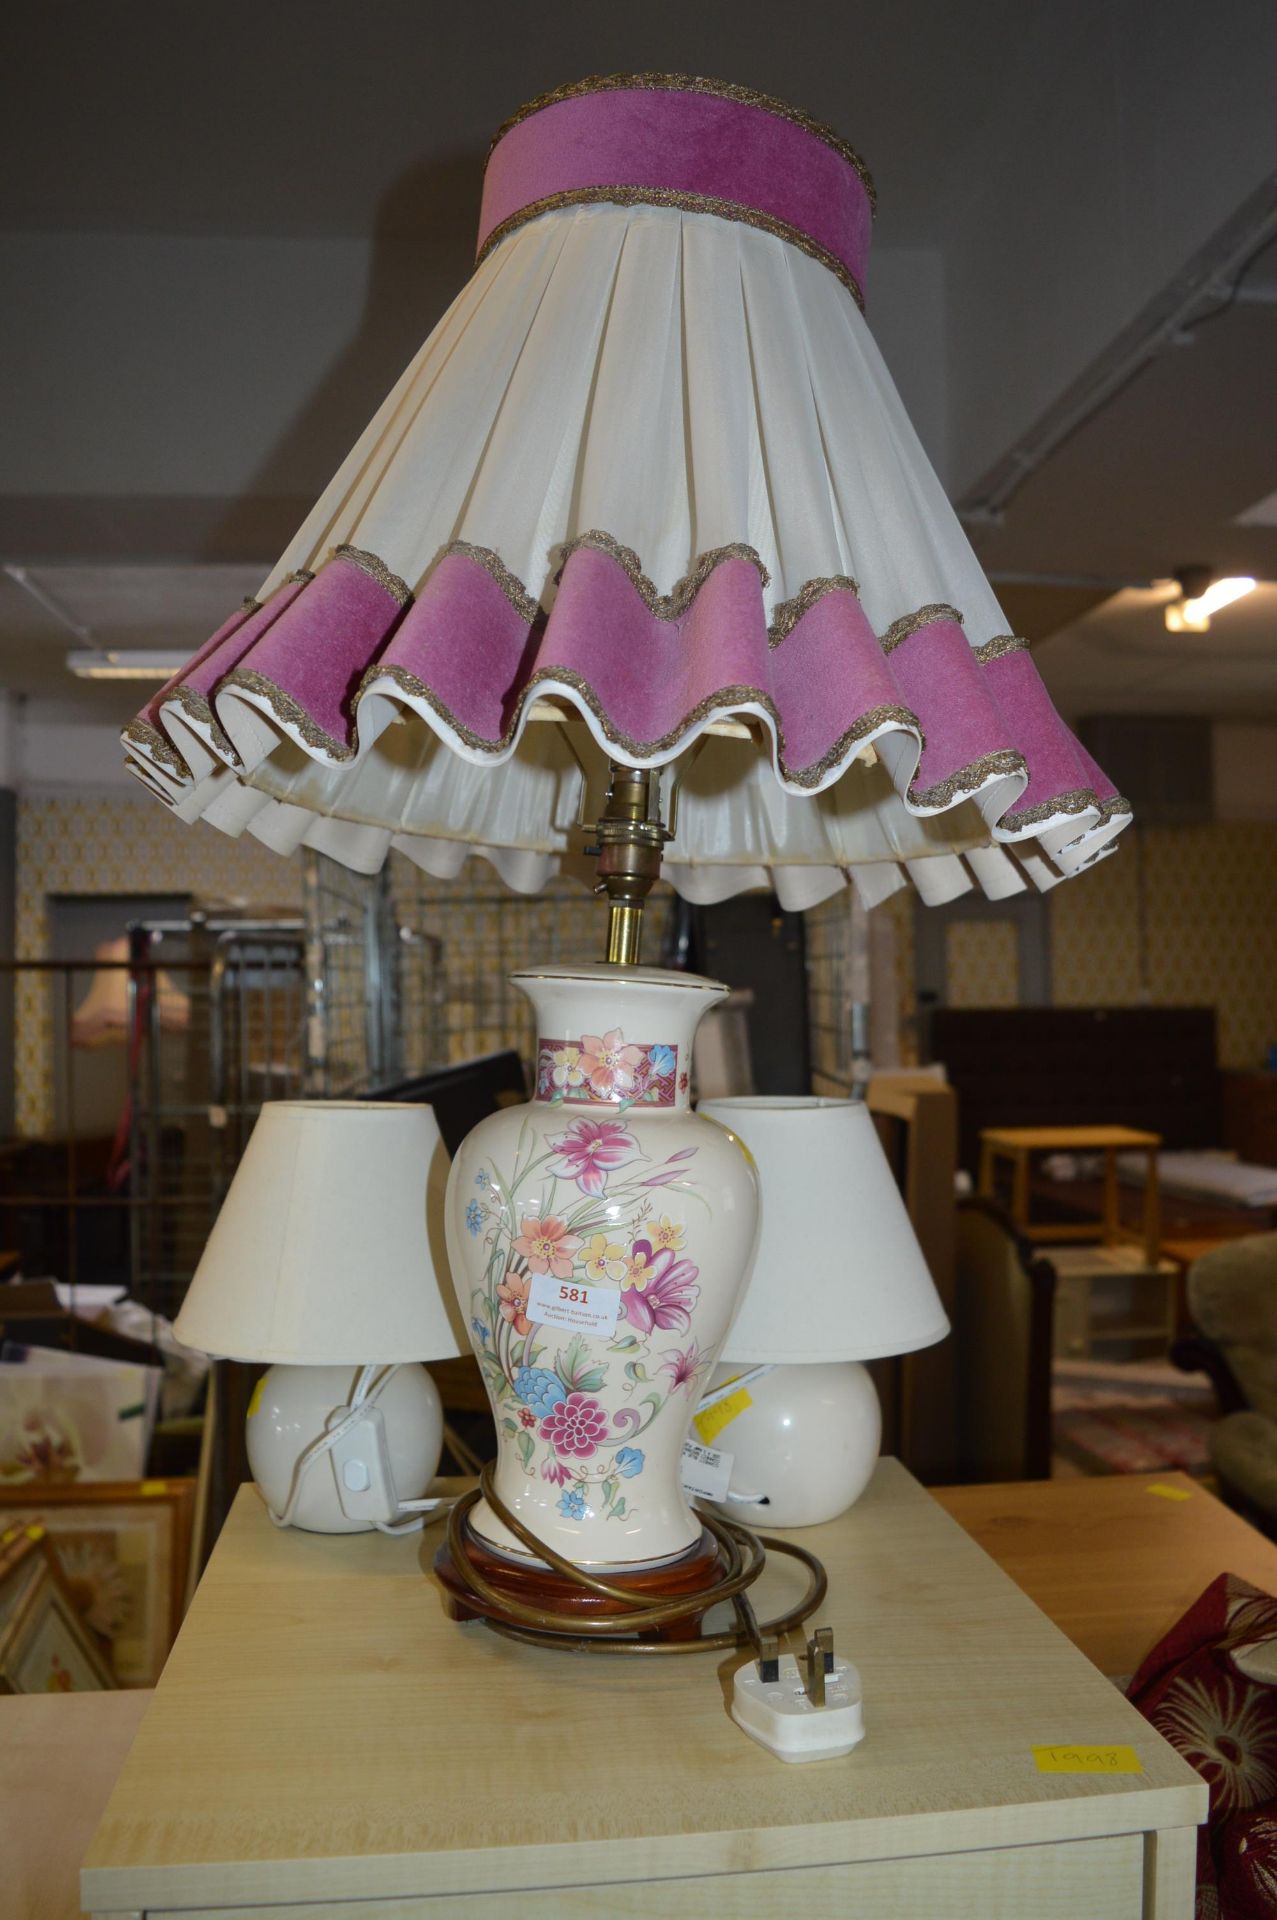 Decorative Pottery Table Lamp with Purple & Cream